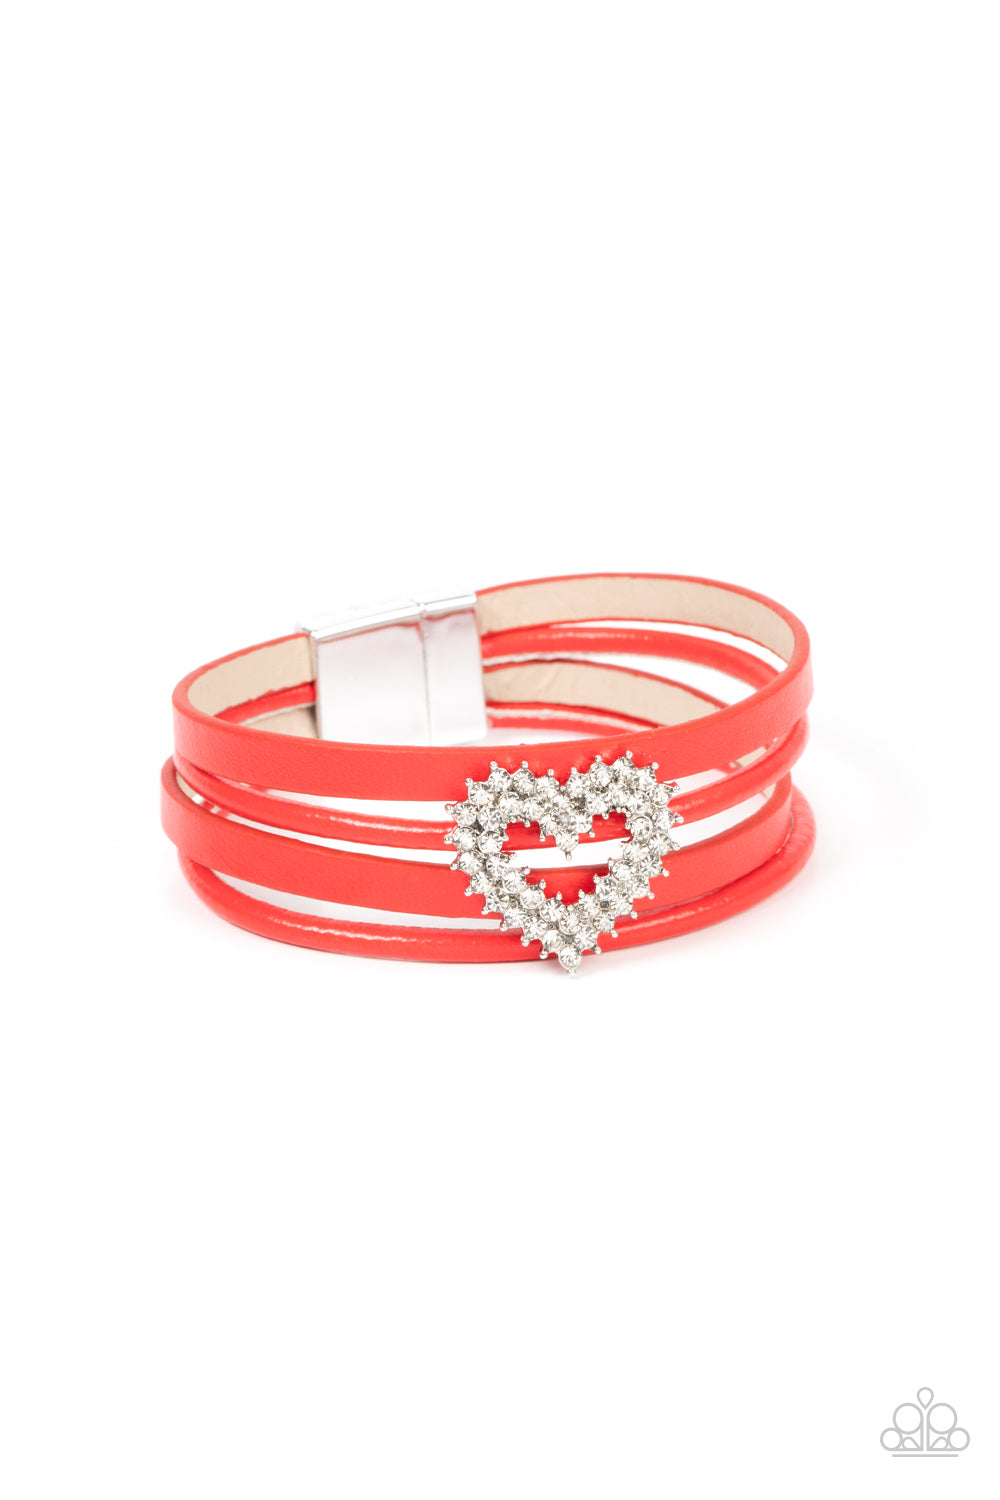 five-dollar-jewelry-wildly-in-love-red-paparazzi-accessories